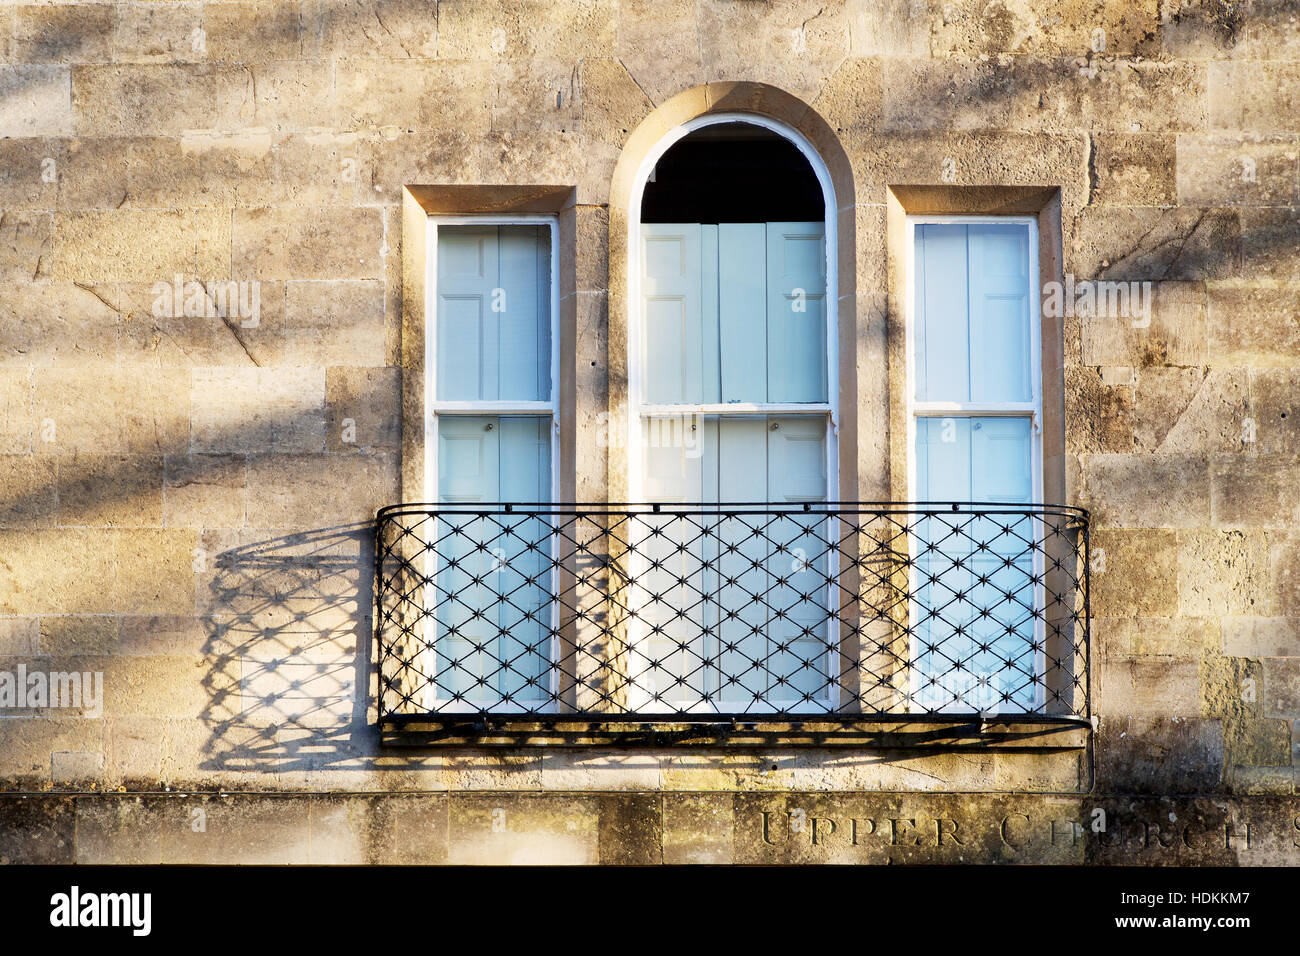 Elegant window with shutters stone lullions and ironwork balcony on a building in Bath Somerset UK Stock Photo